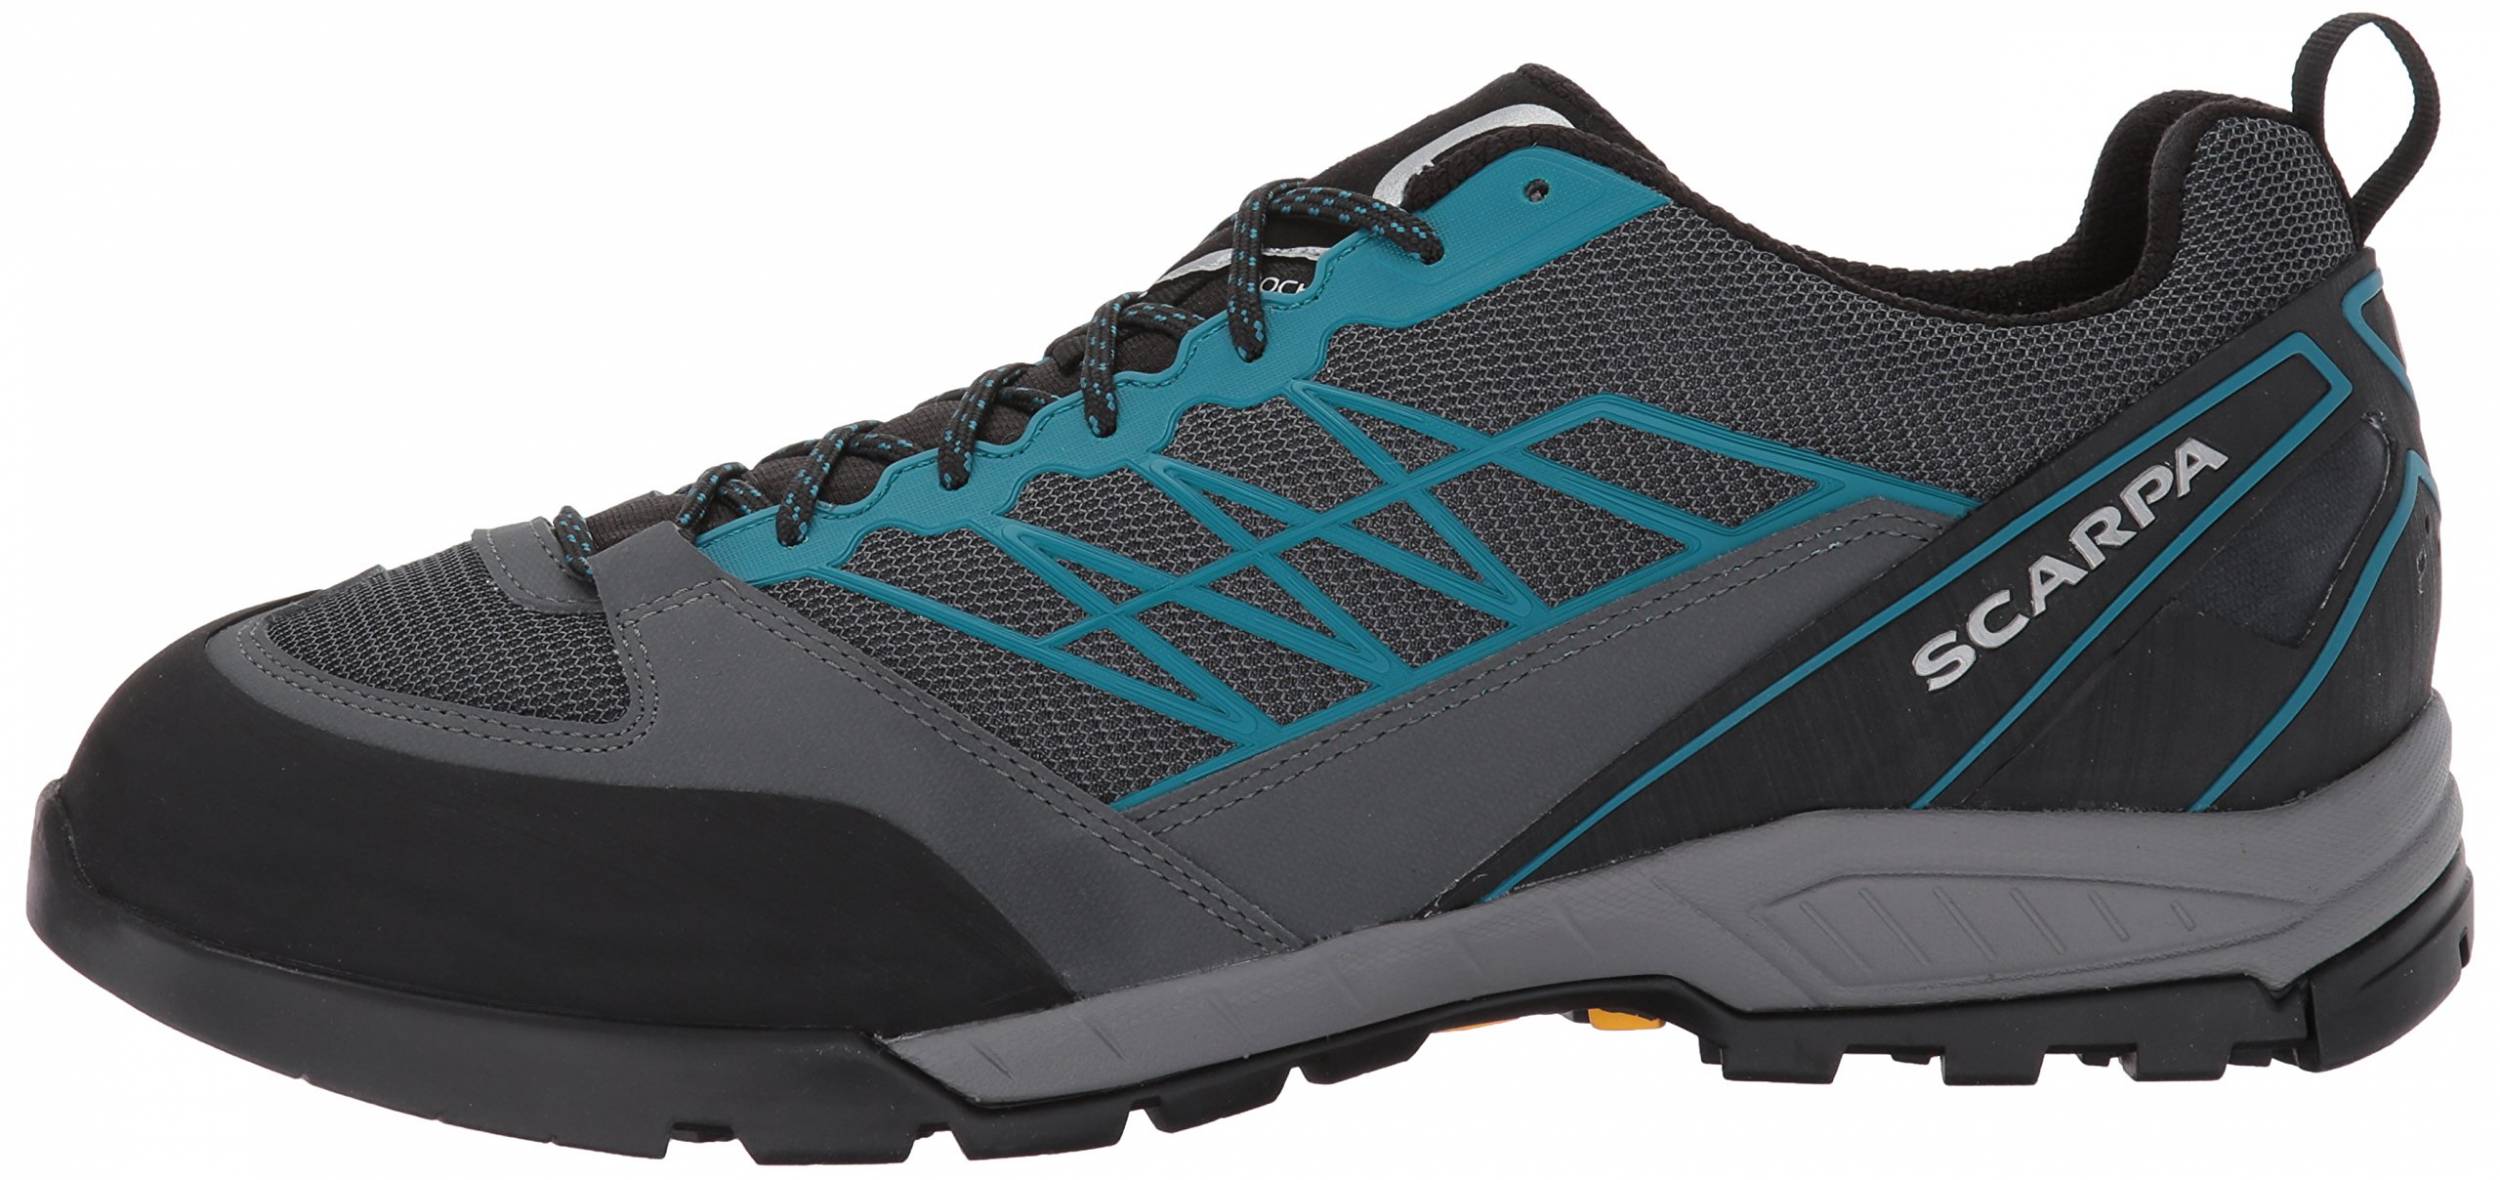 Only $101 + Review of Scarpa Epic Lite 